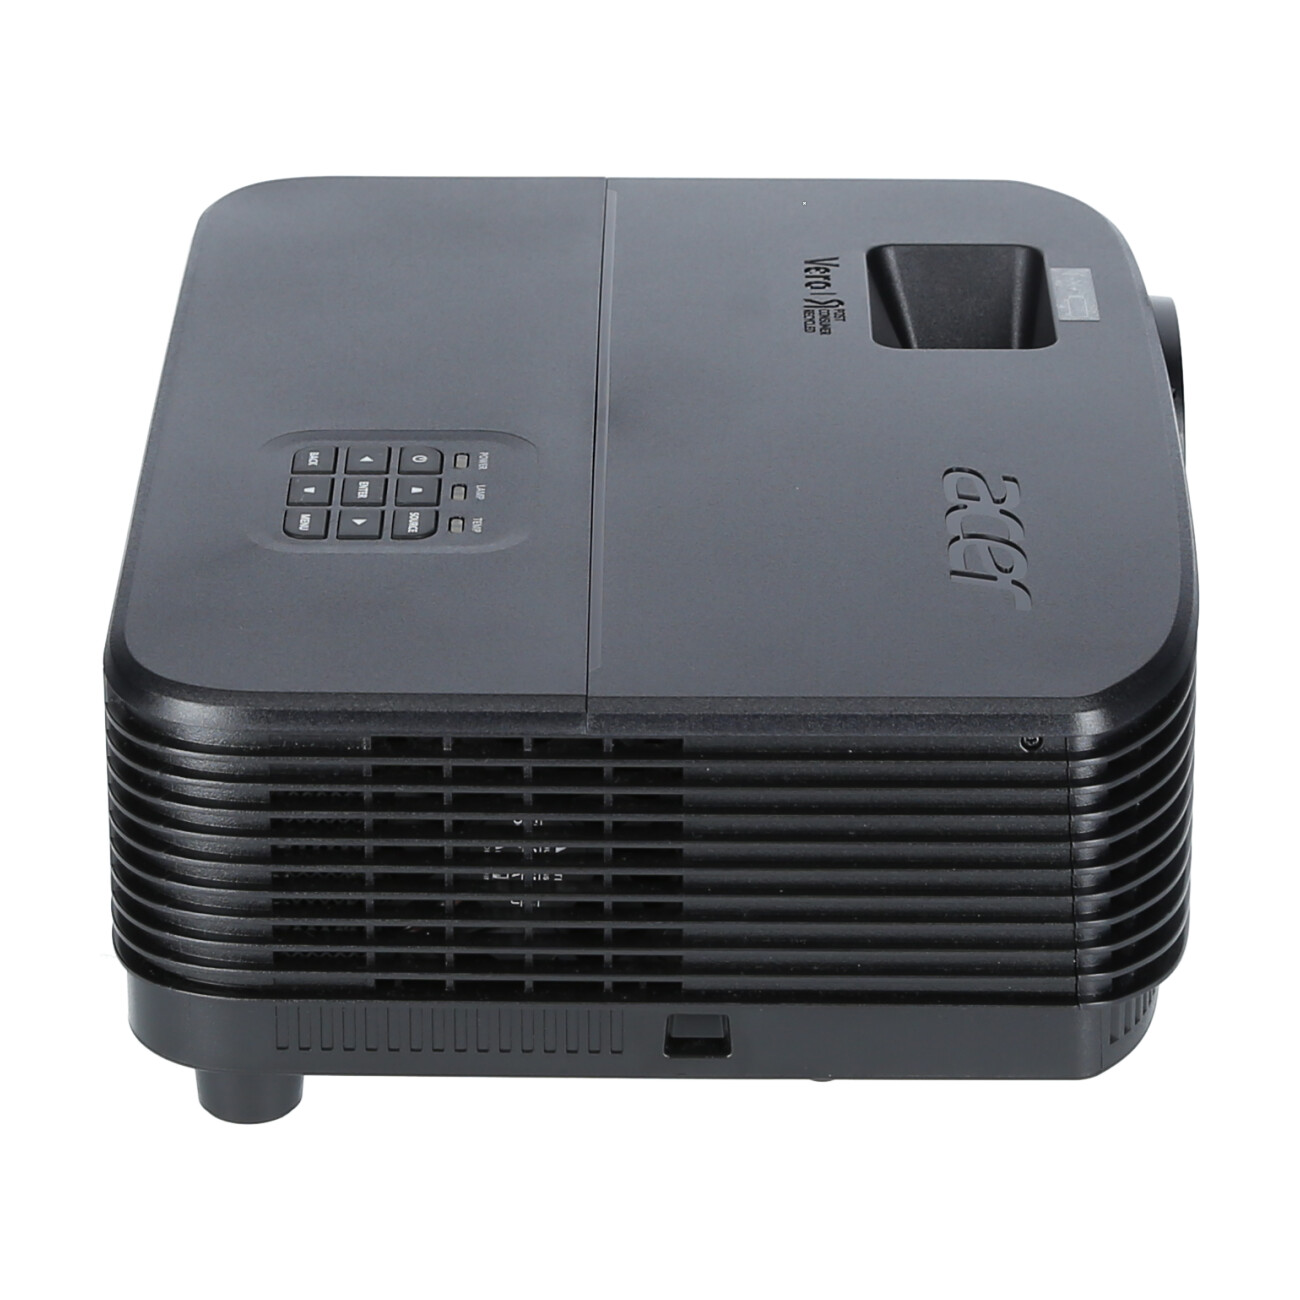 Acer-Vero-PD2527i-Full-HD-Business-Projector